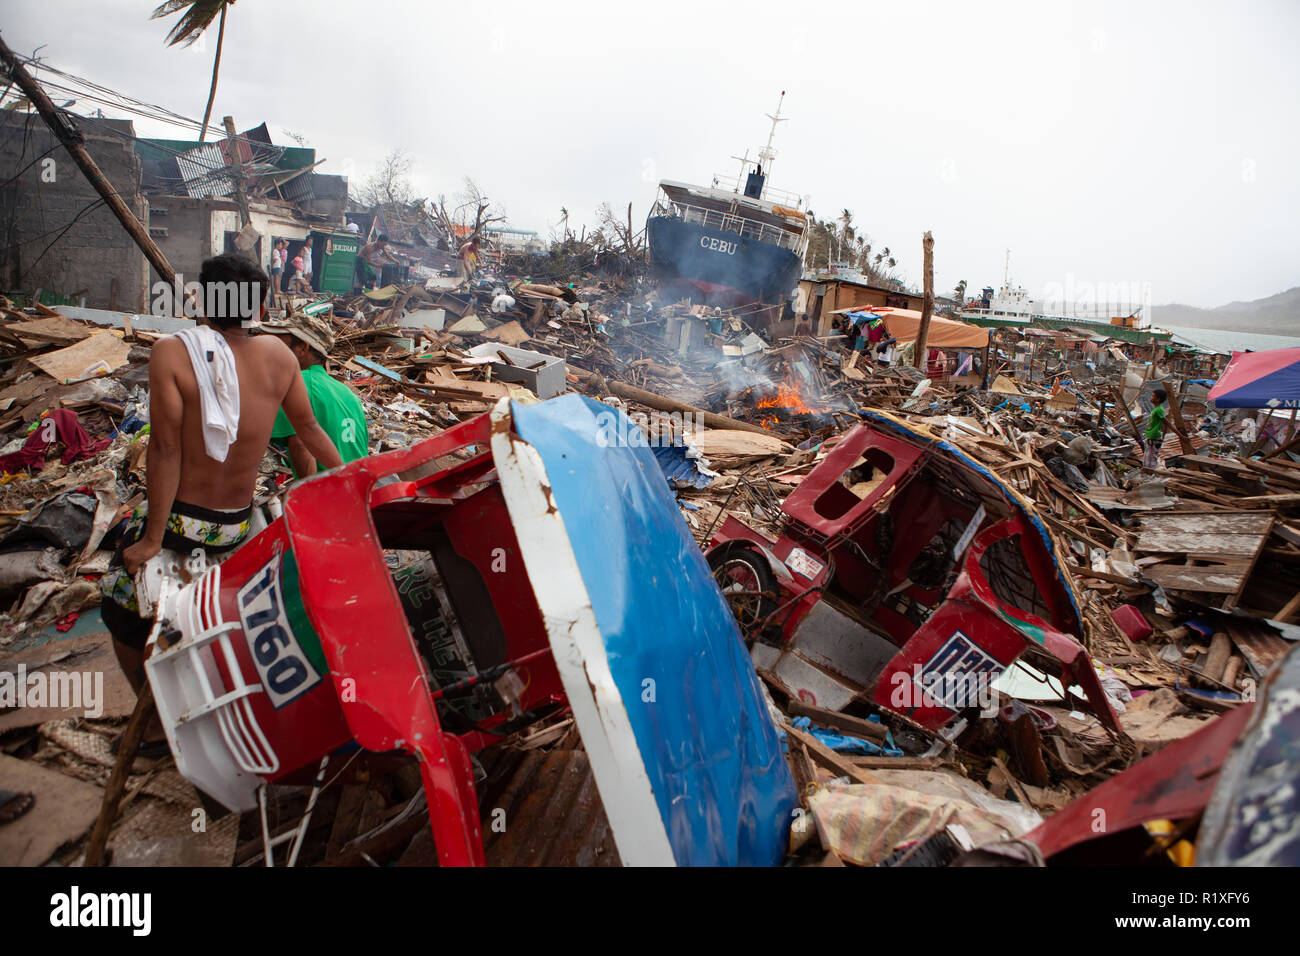 The aftermath of Typhoon Haiyan in November 2013.Tacloban,located in the Wester Visayas of the Philippines took a direct hit. The resulting storm surg Stock Photo